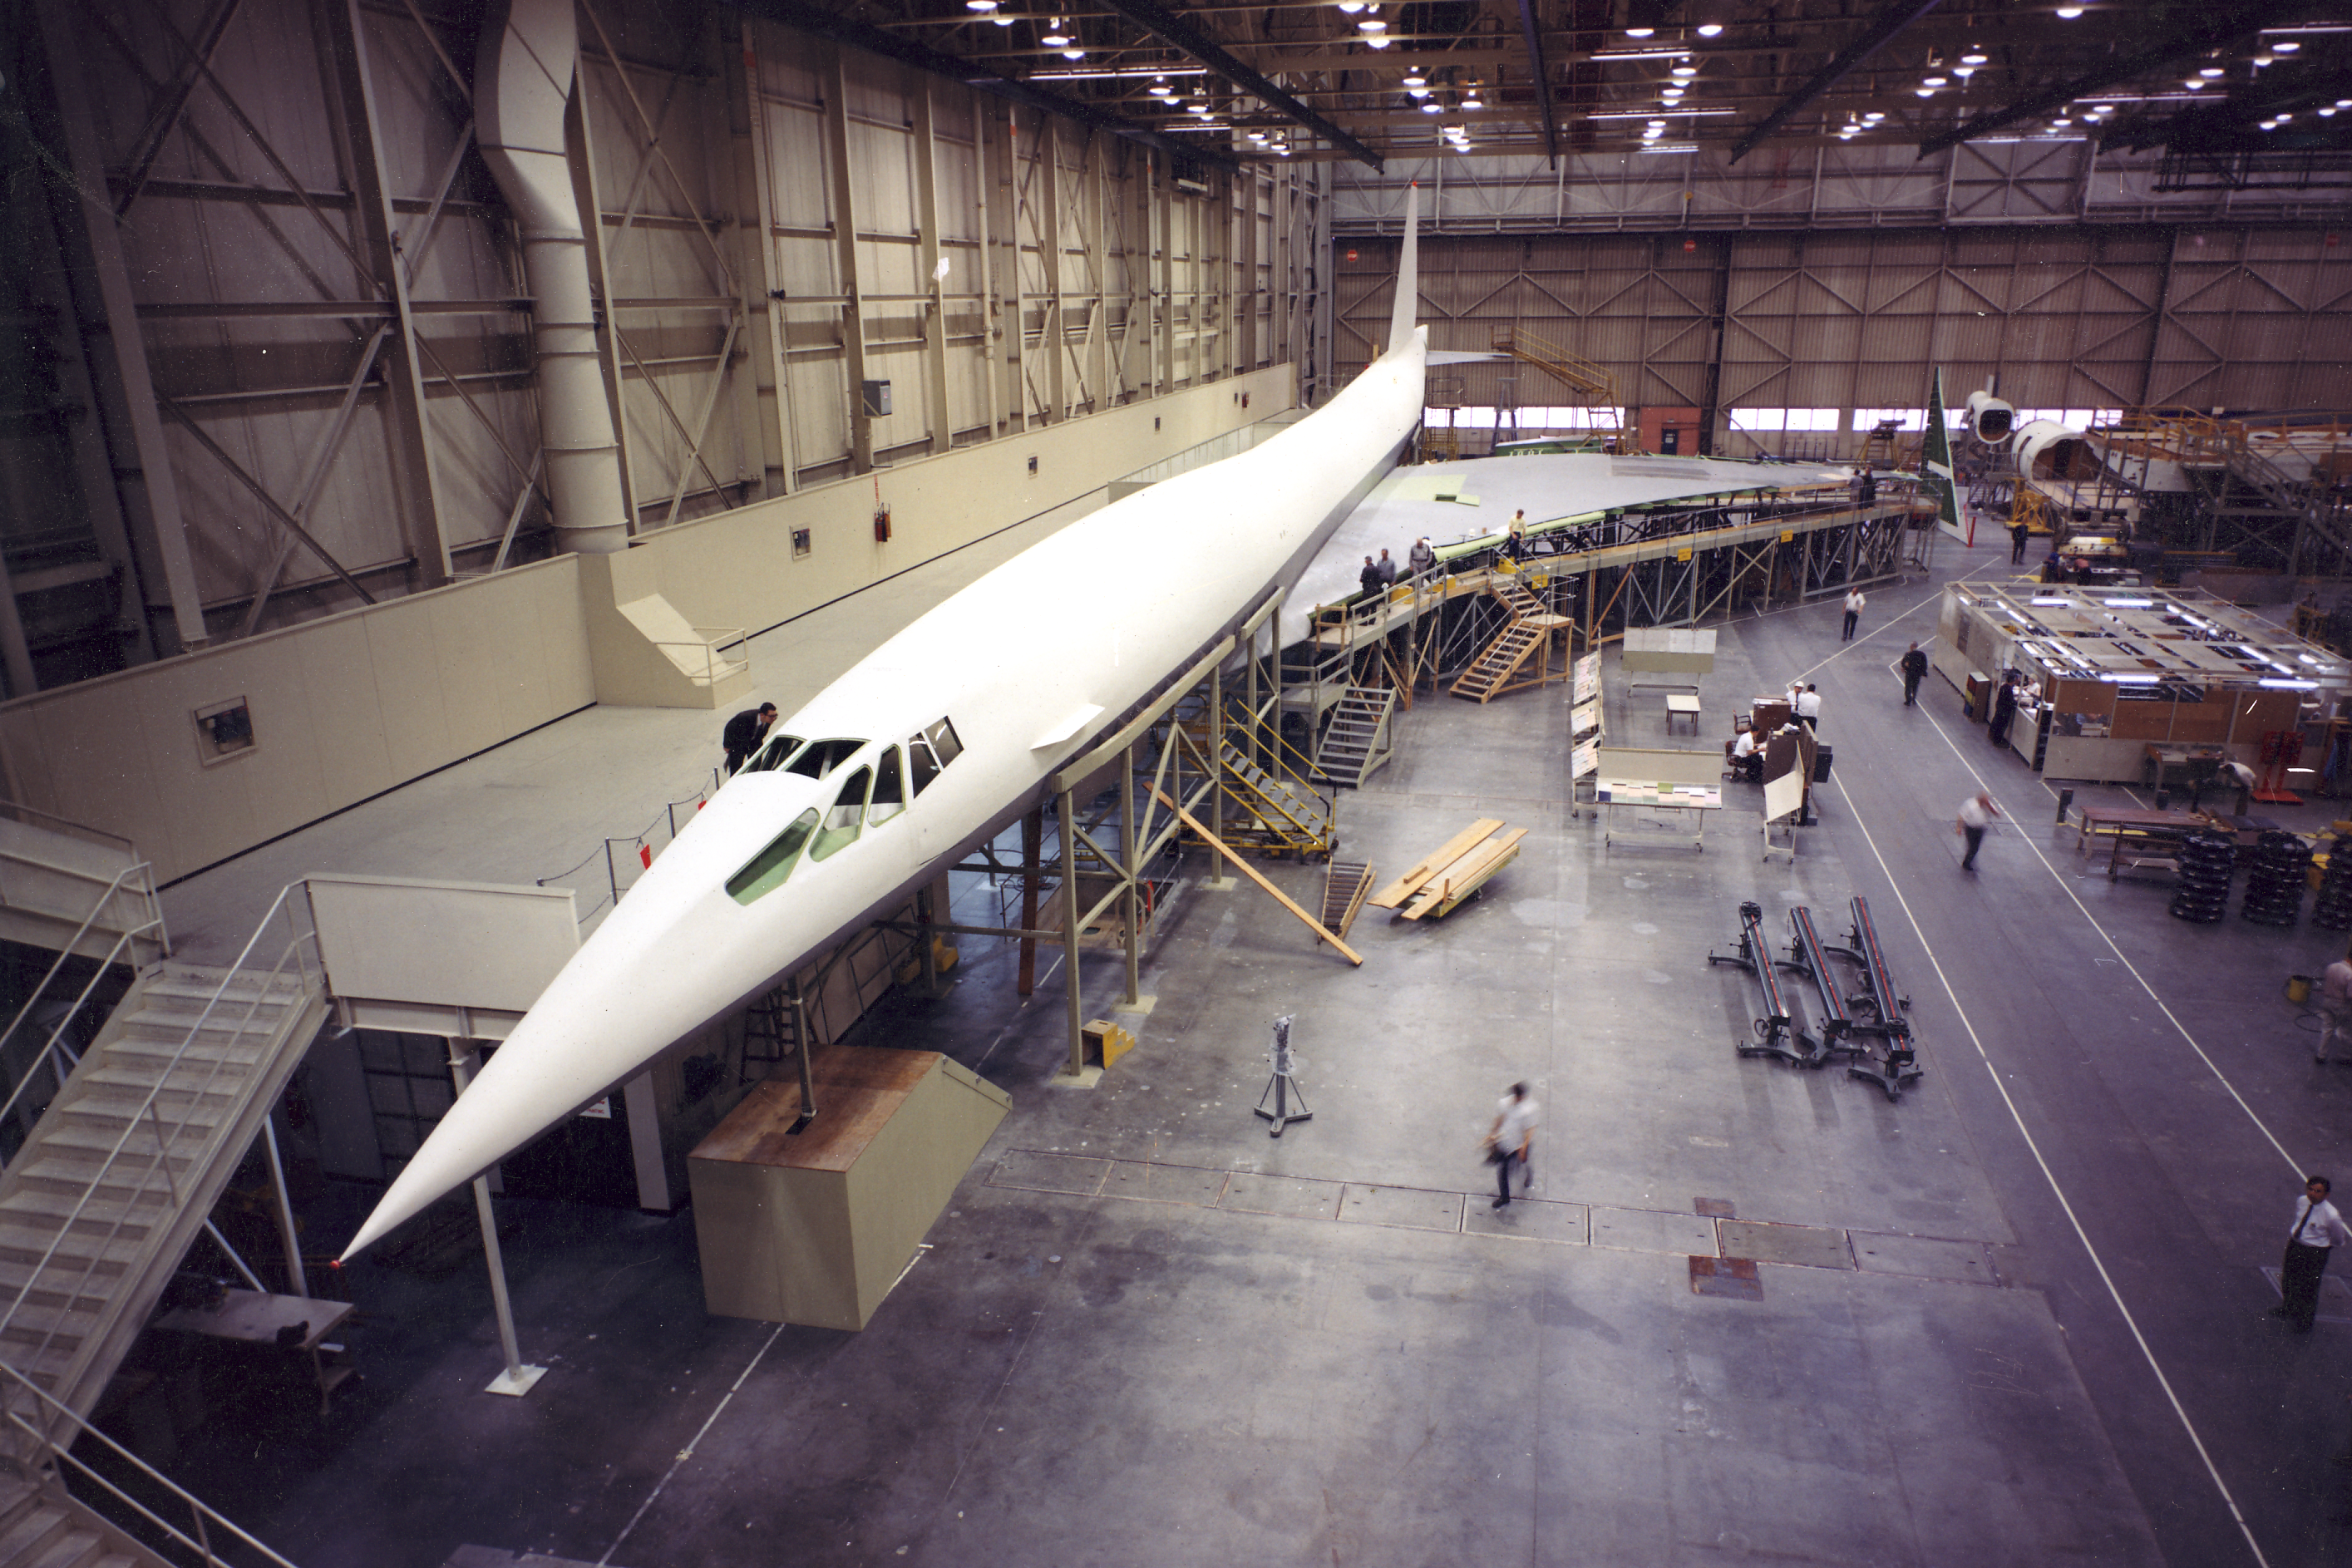 A partially constructed Boeing 2707 on display.